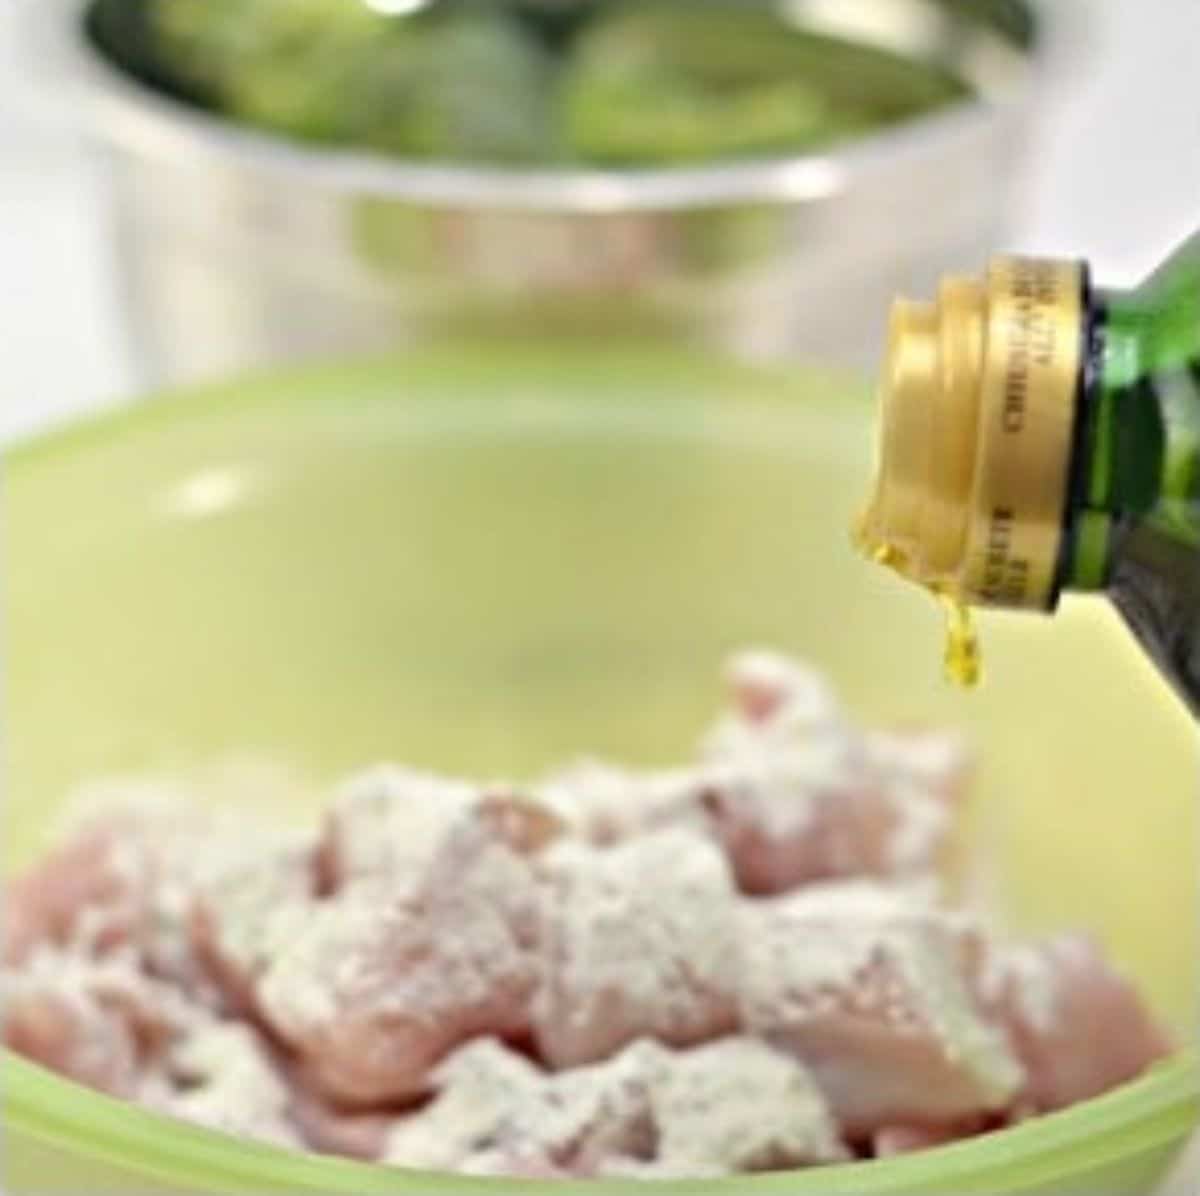 In a mixing bowl, the olive oil is being poured onto the chicken.